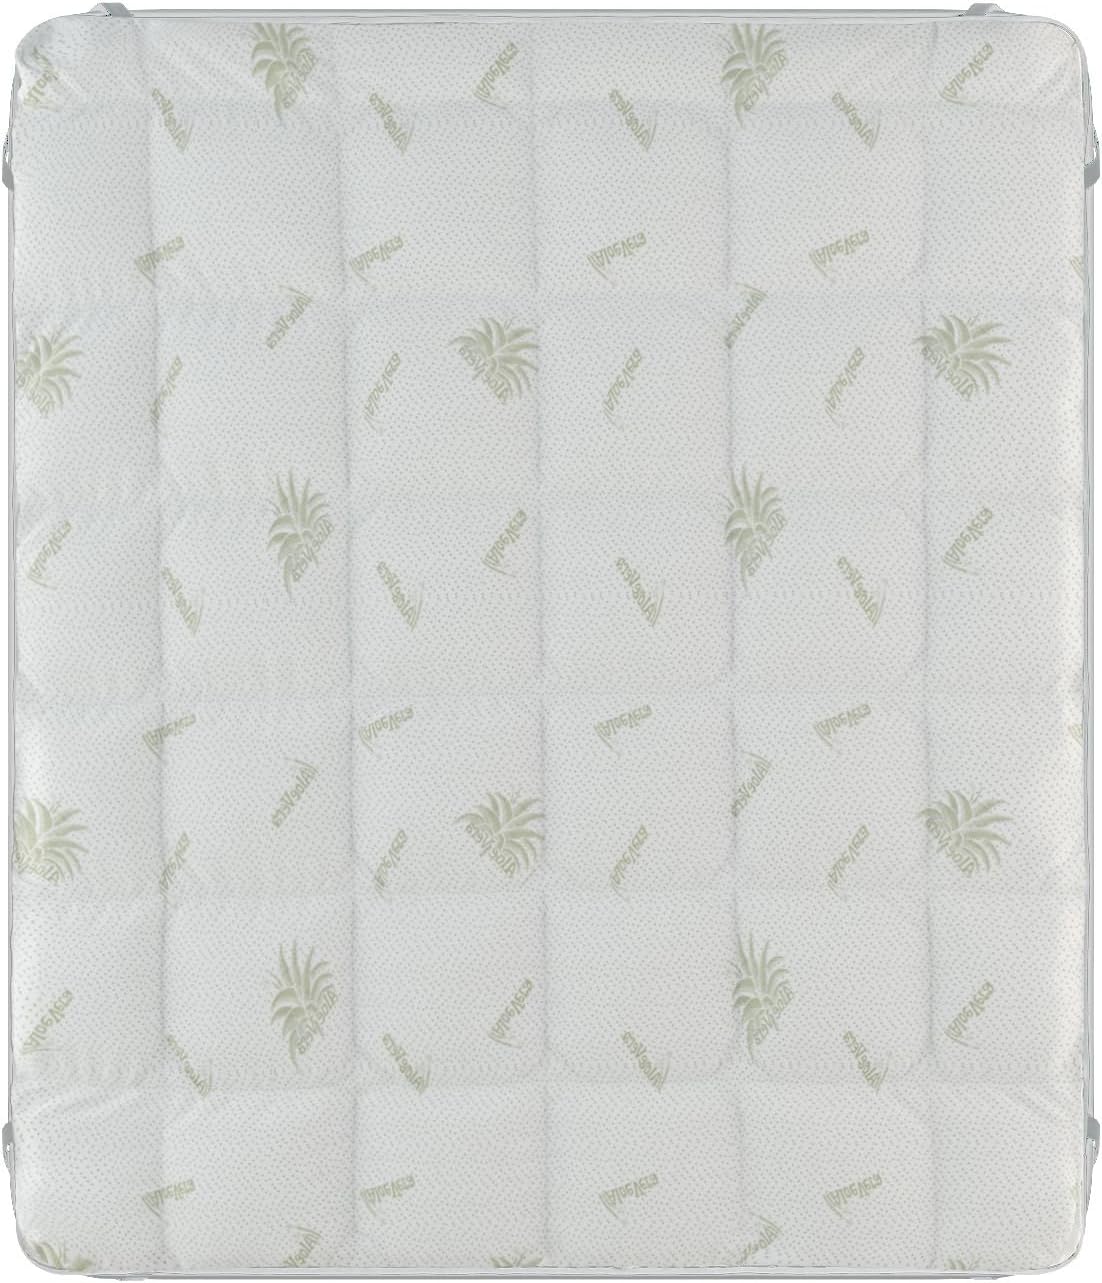 Elegant White Quilted Mattress Topper - Various Sizes